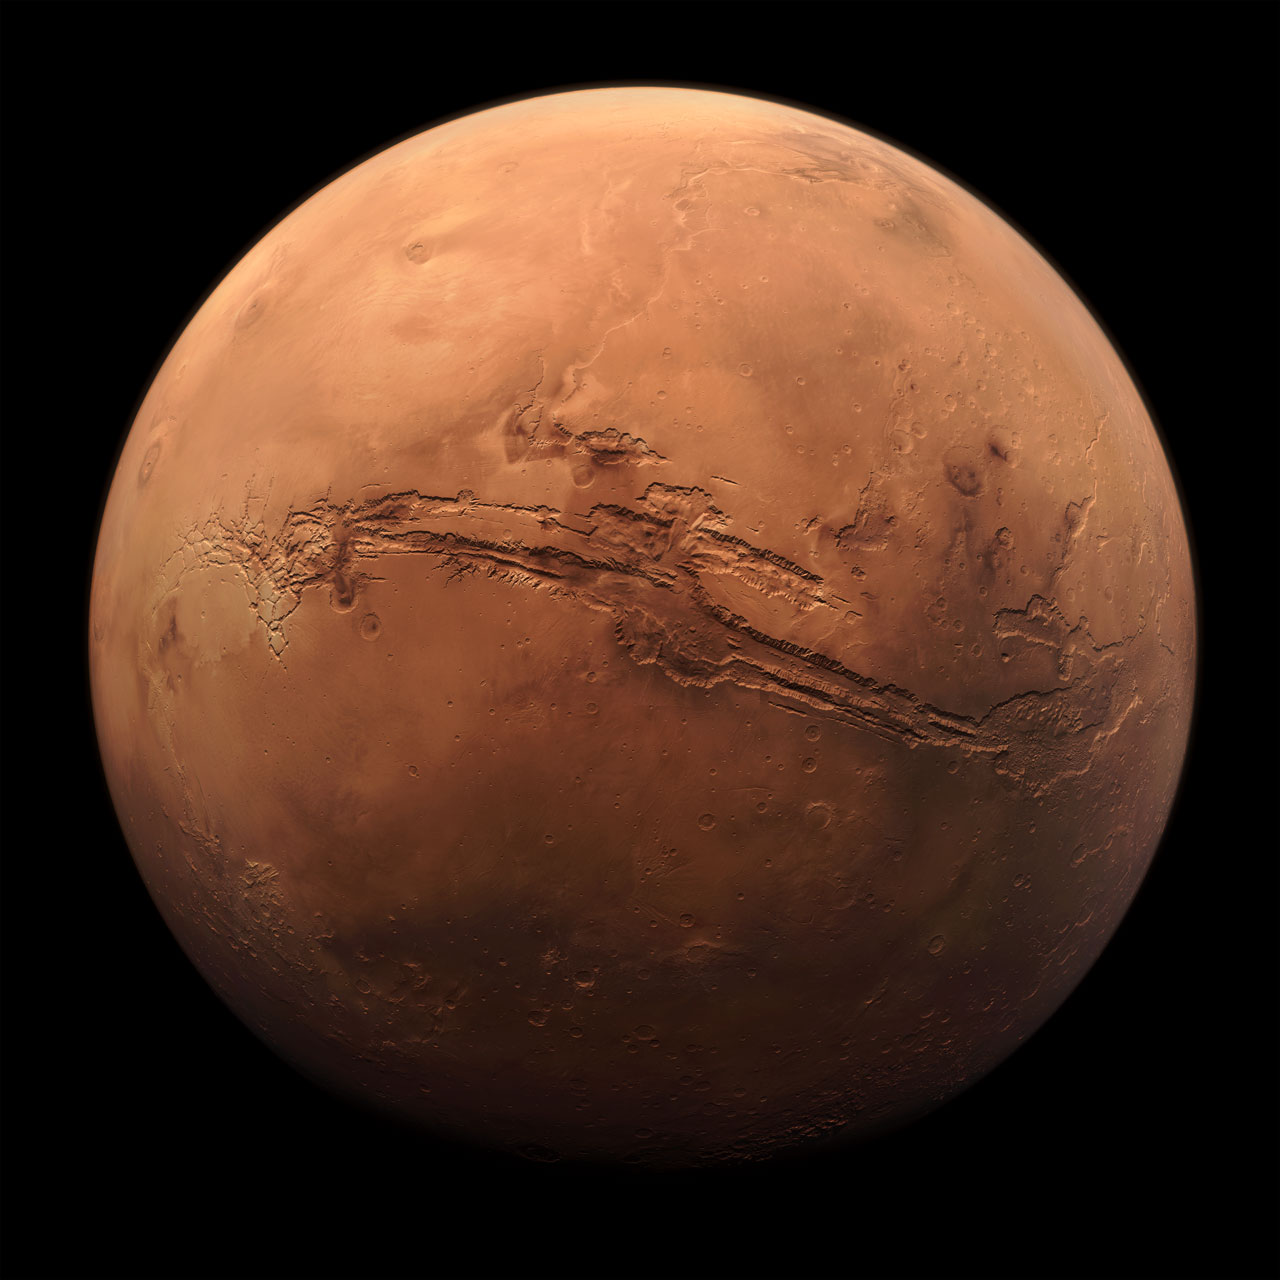 Composite image of Mars showing massive canyon stretching across most of its surface.